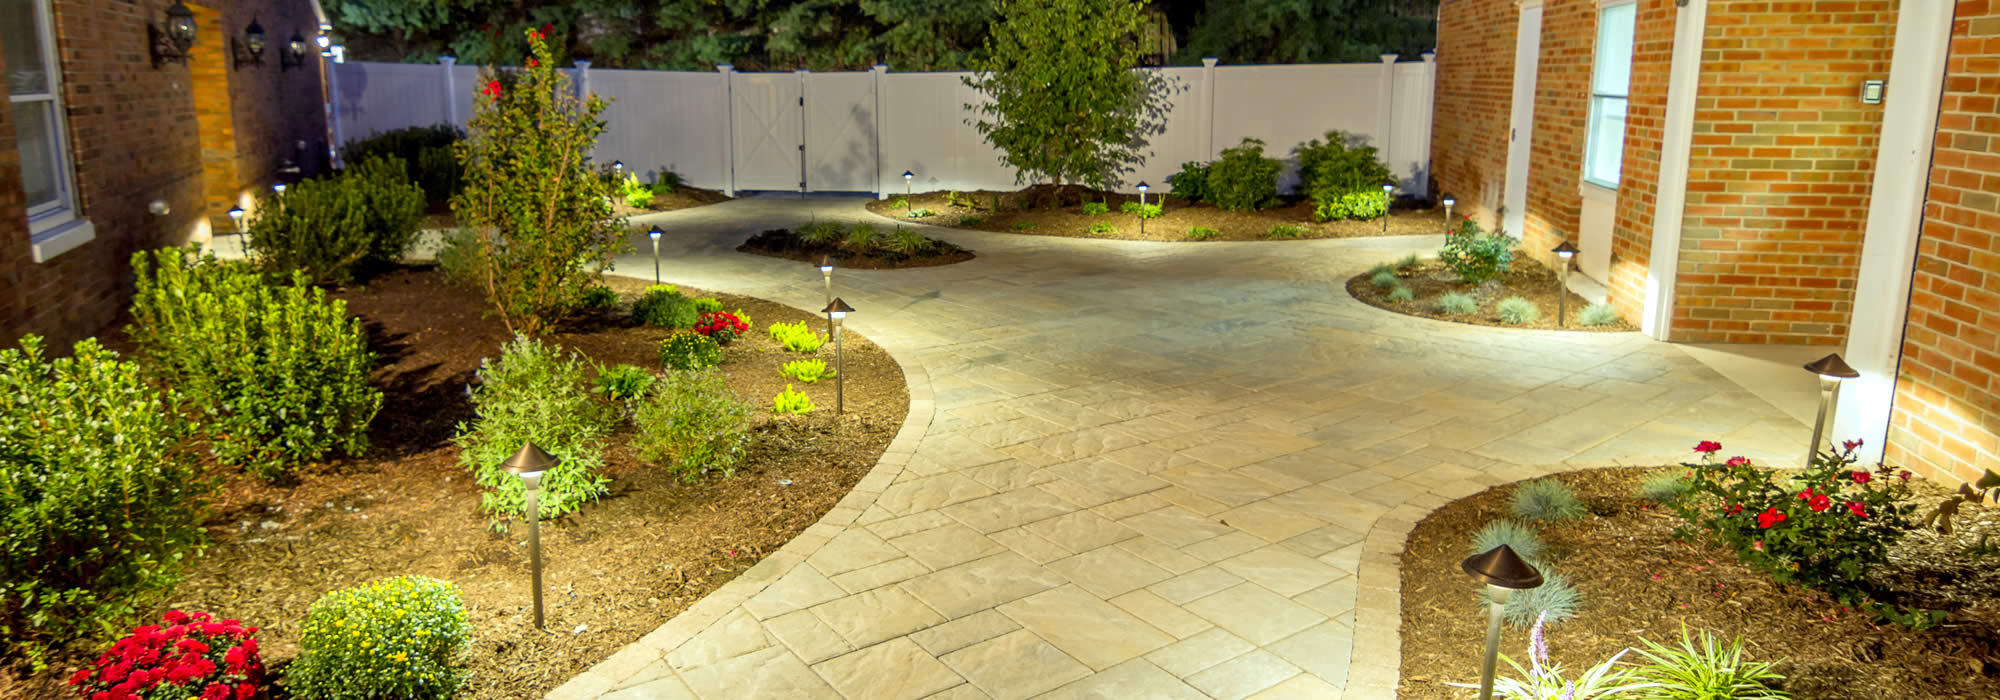 Landscaping Services in DeForest